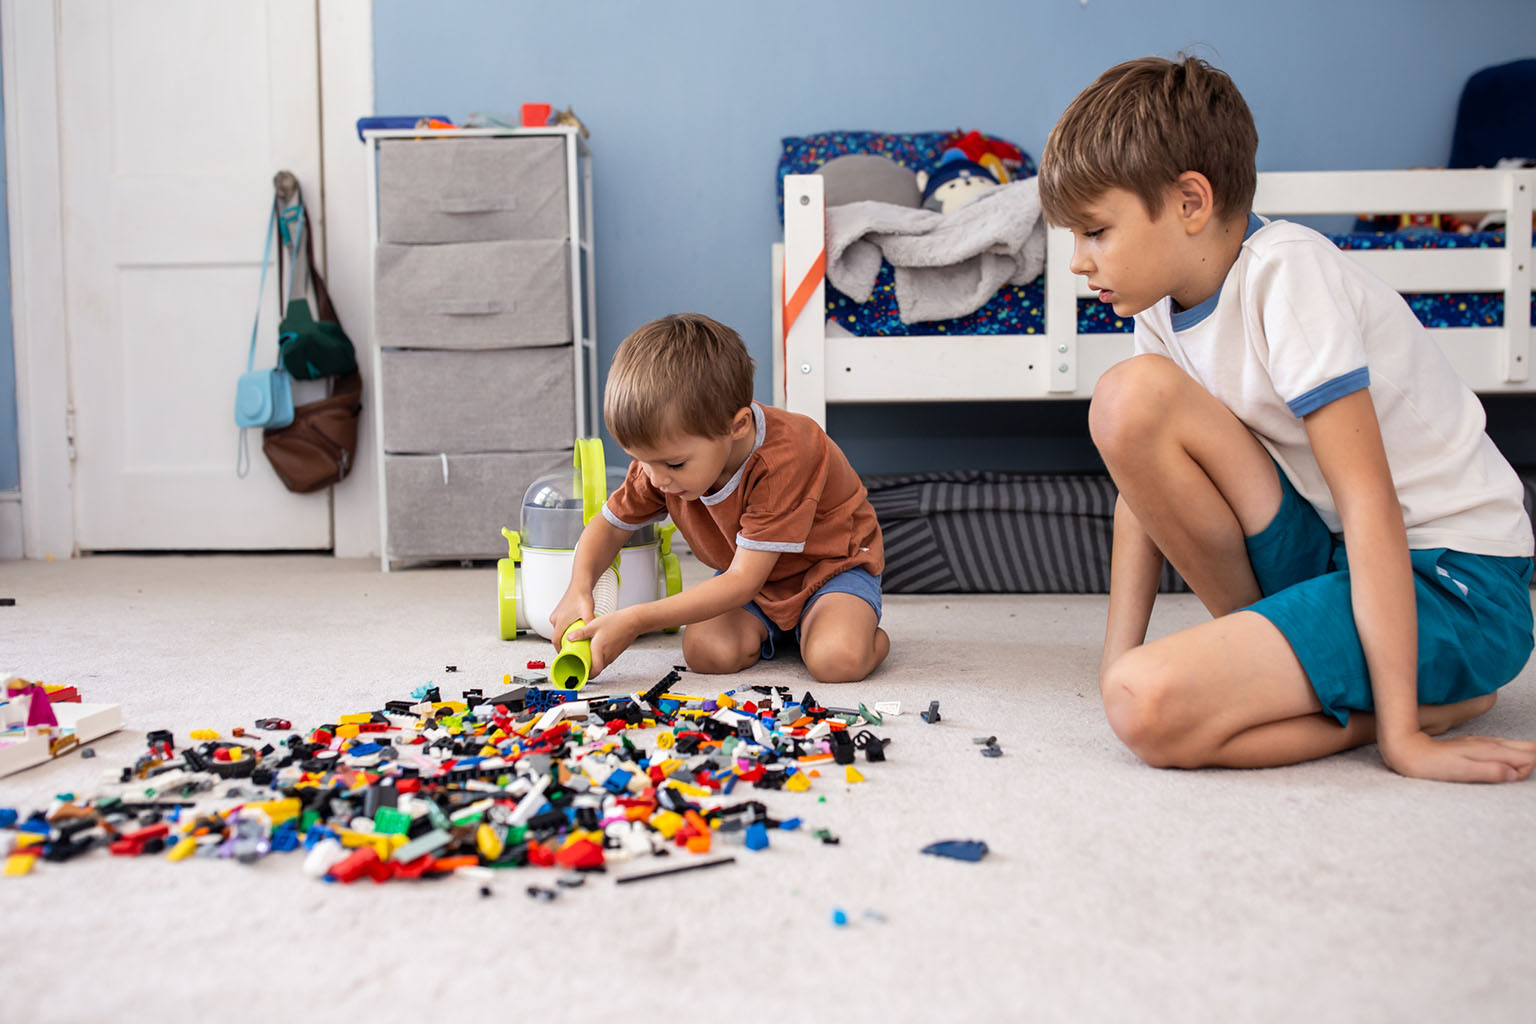 A young boy uses his Pick-Up Bricks toy vacuum to clean up a mess of LEGO spread across the floor as his older brother watches